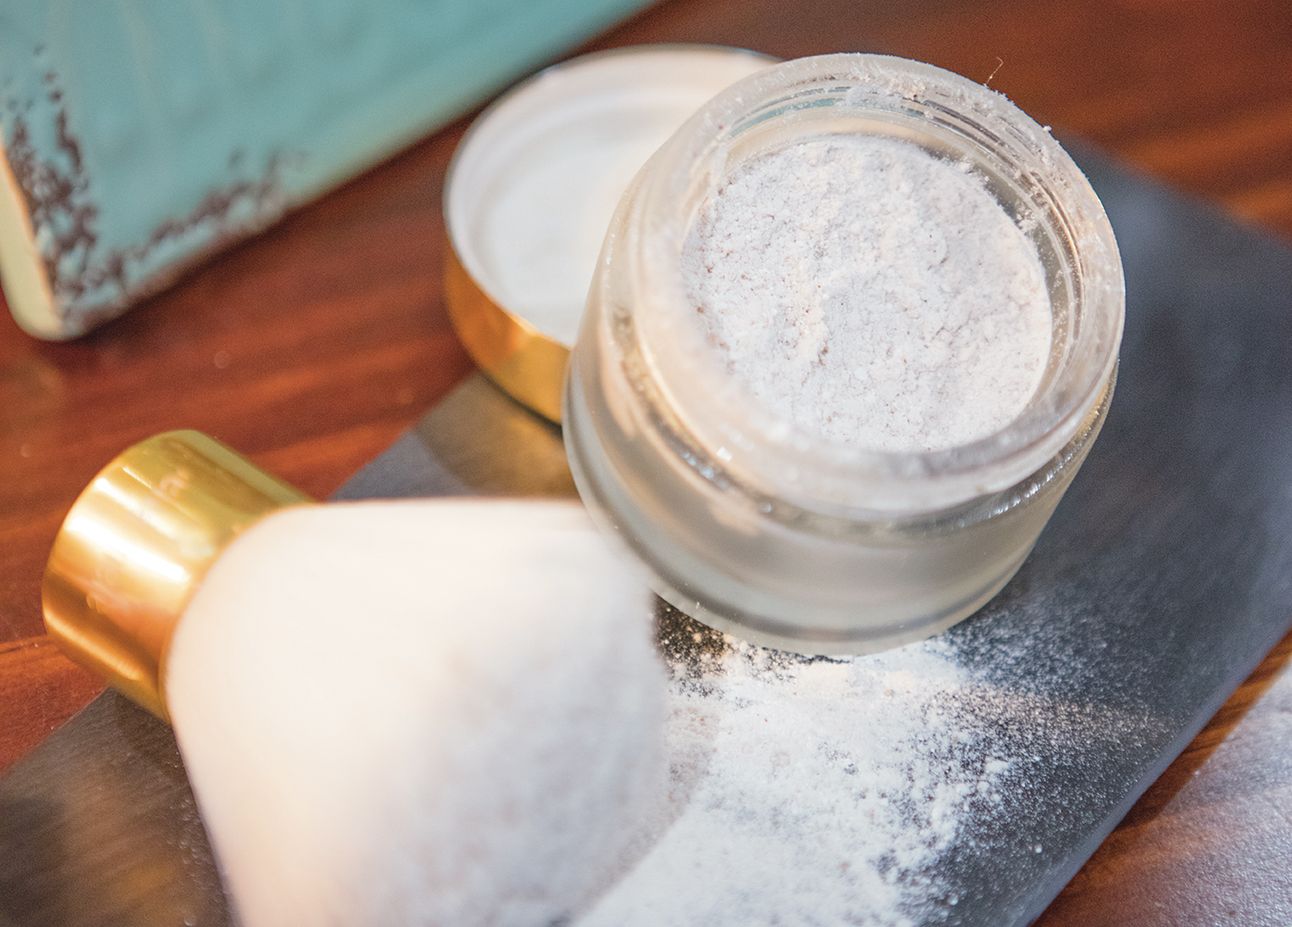 How to make your own finishing powder